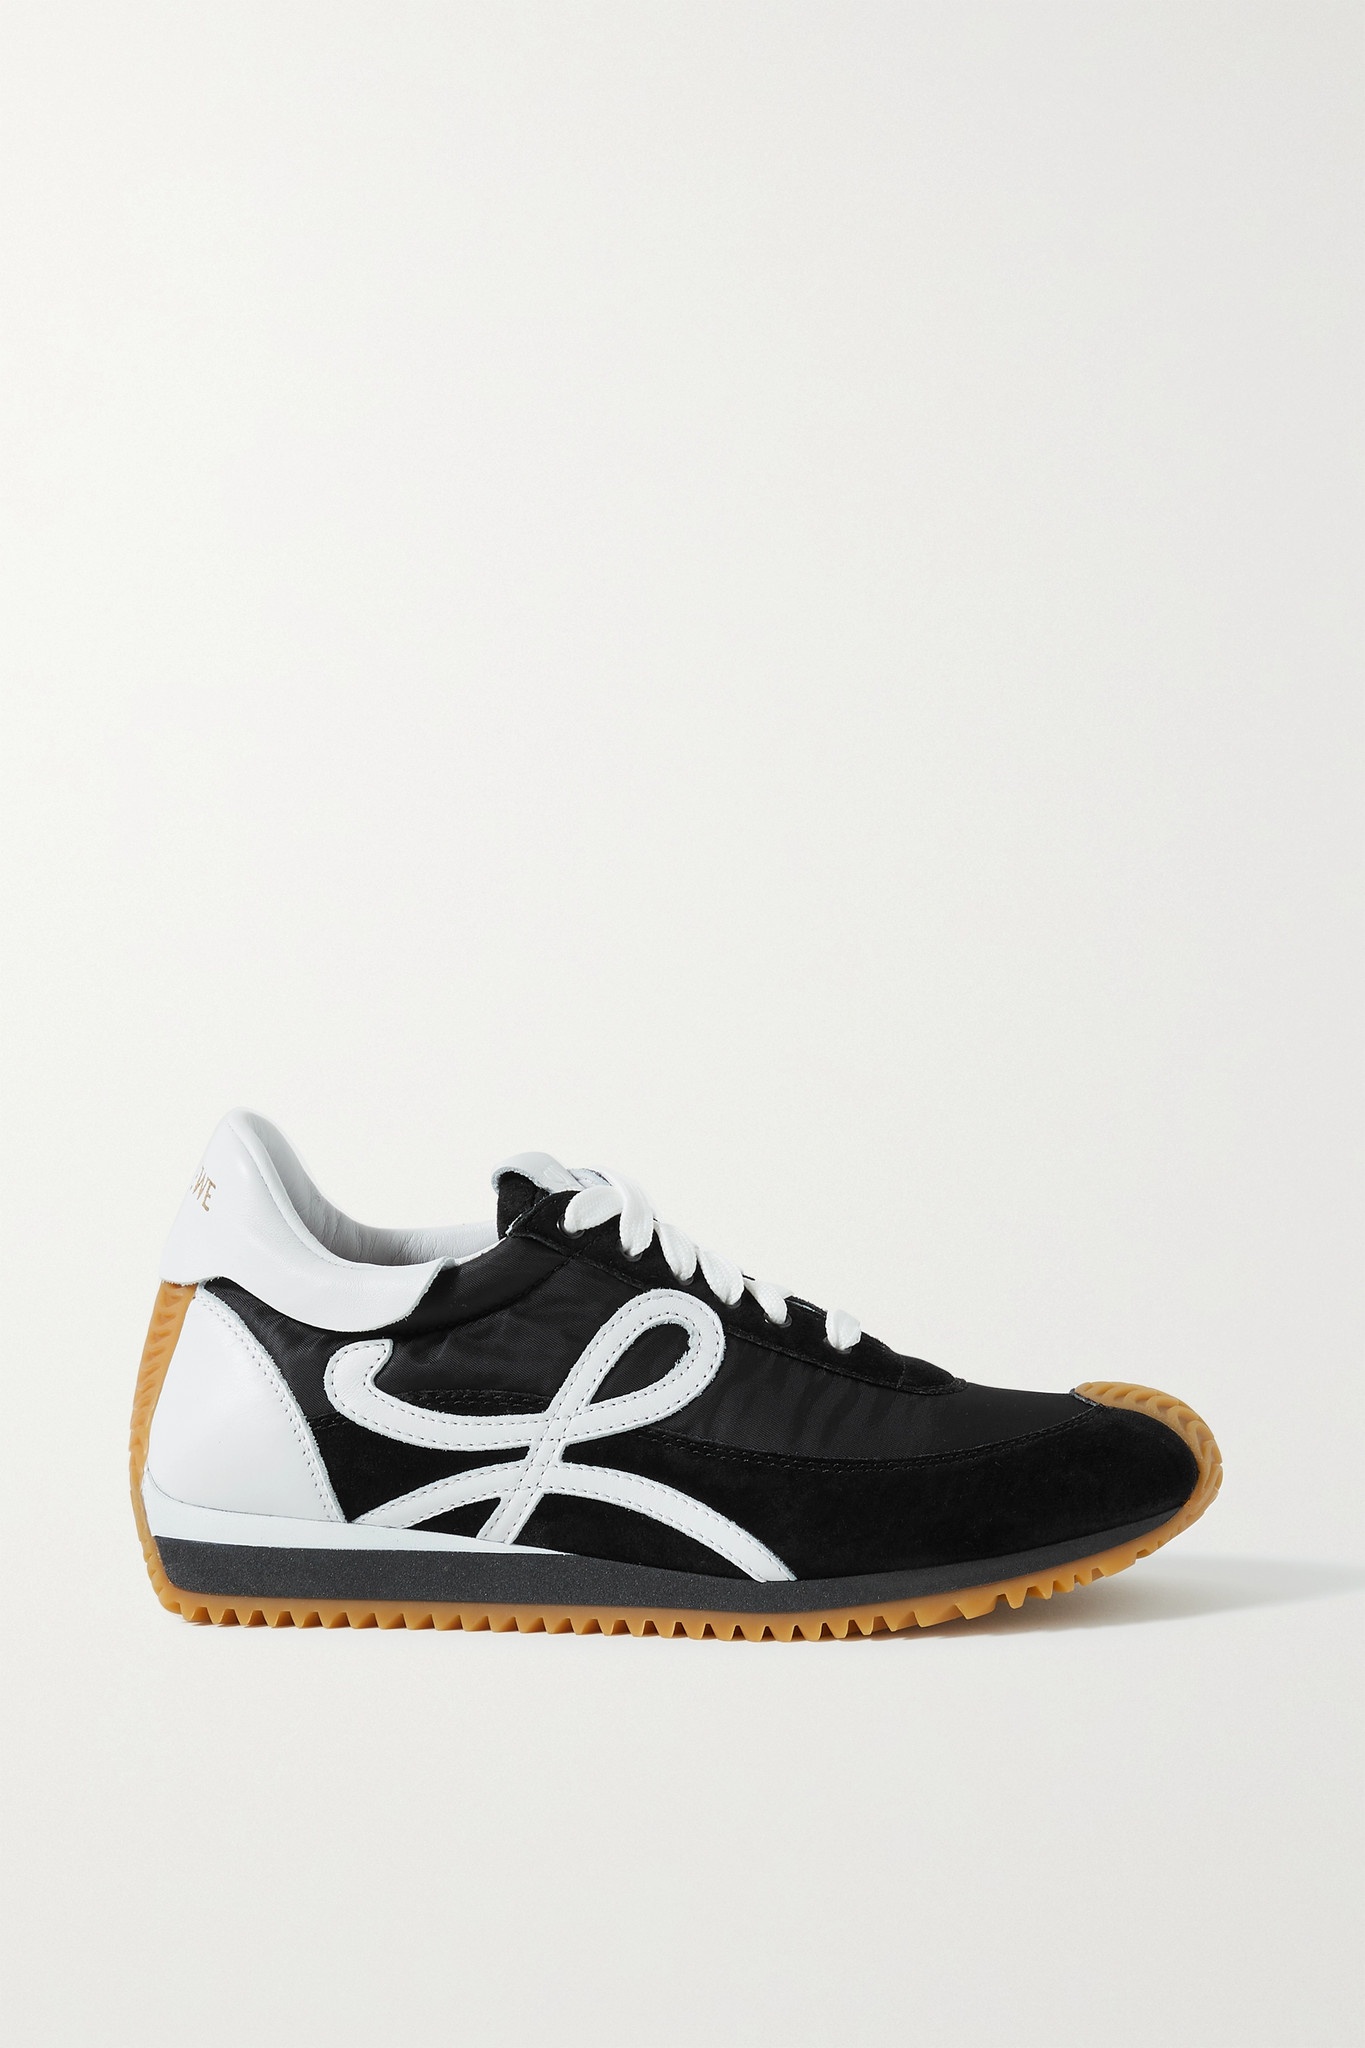 Flow logo-appliquéd shell, leather and suede sneakers - 1